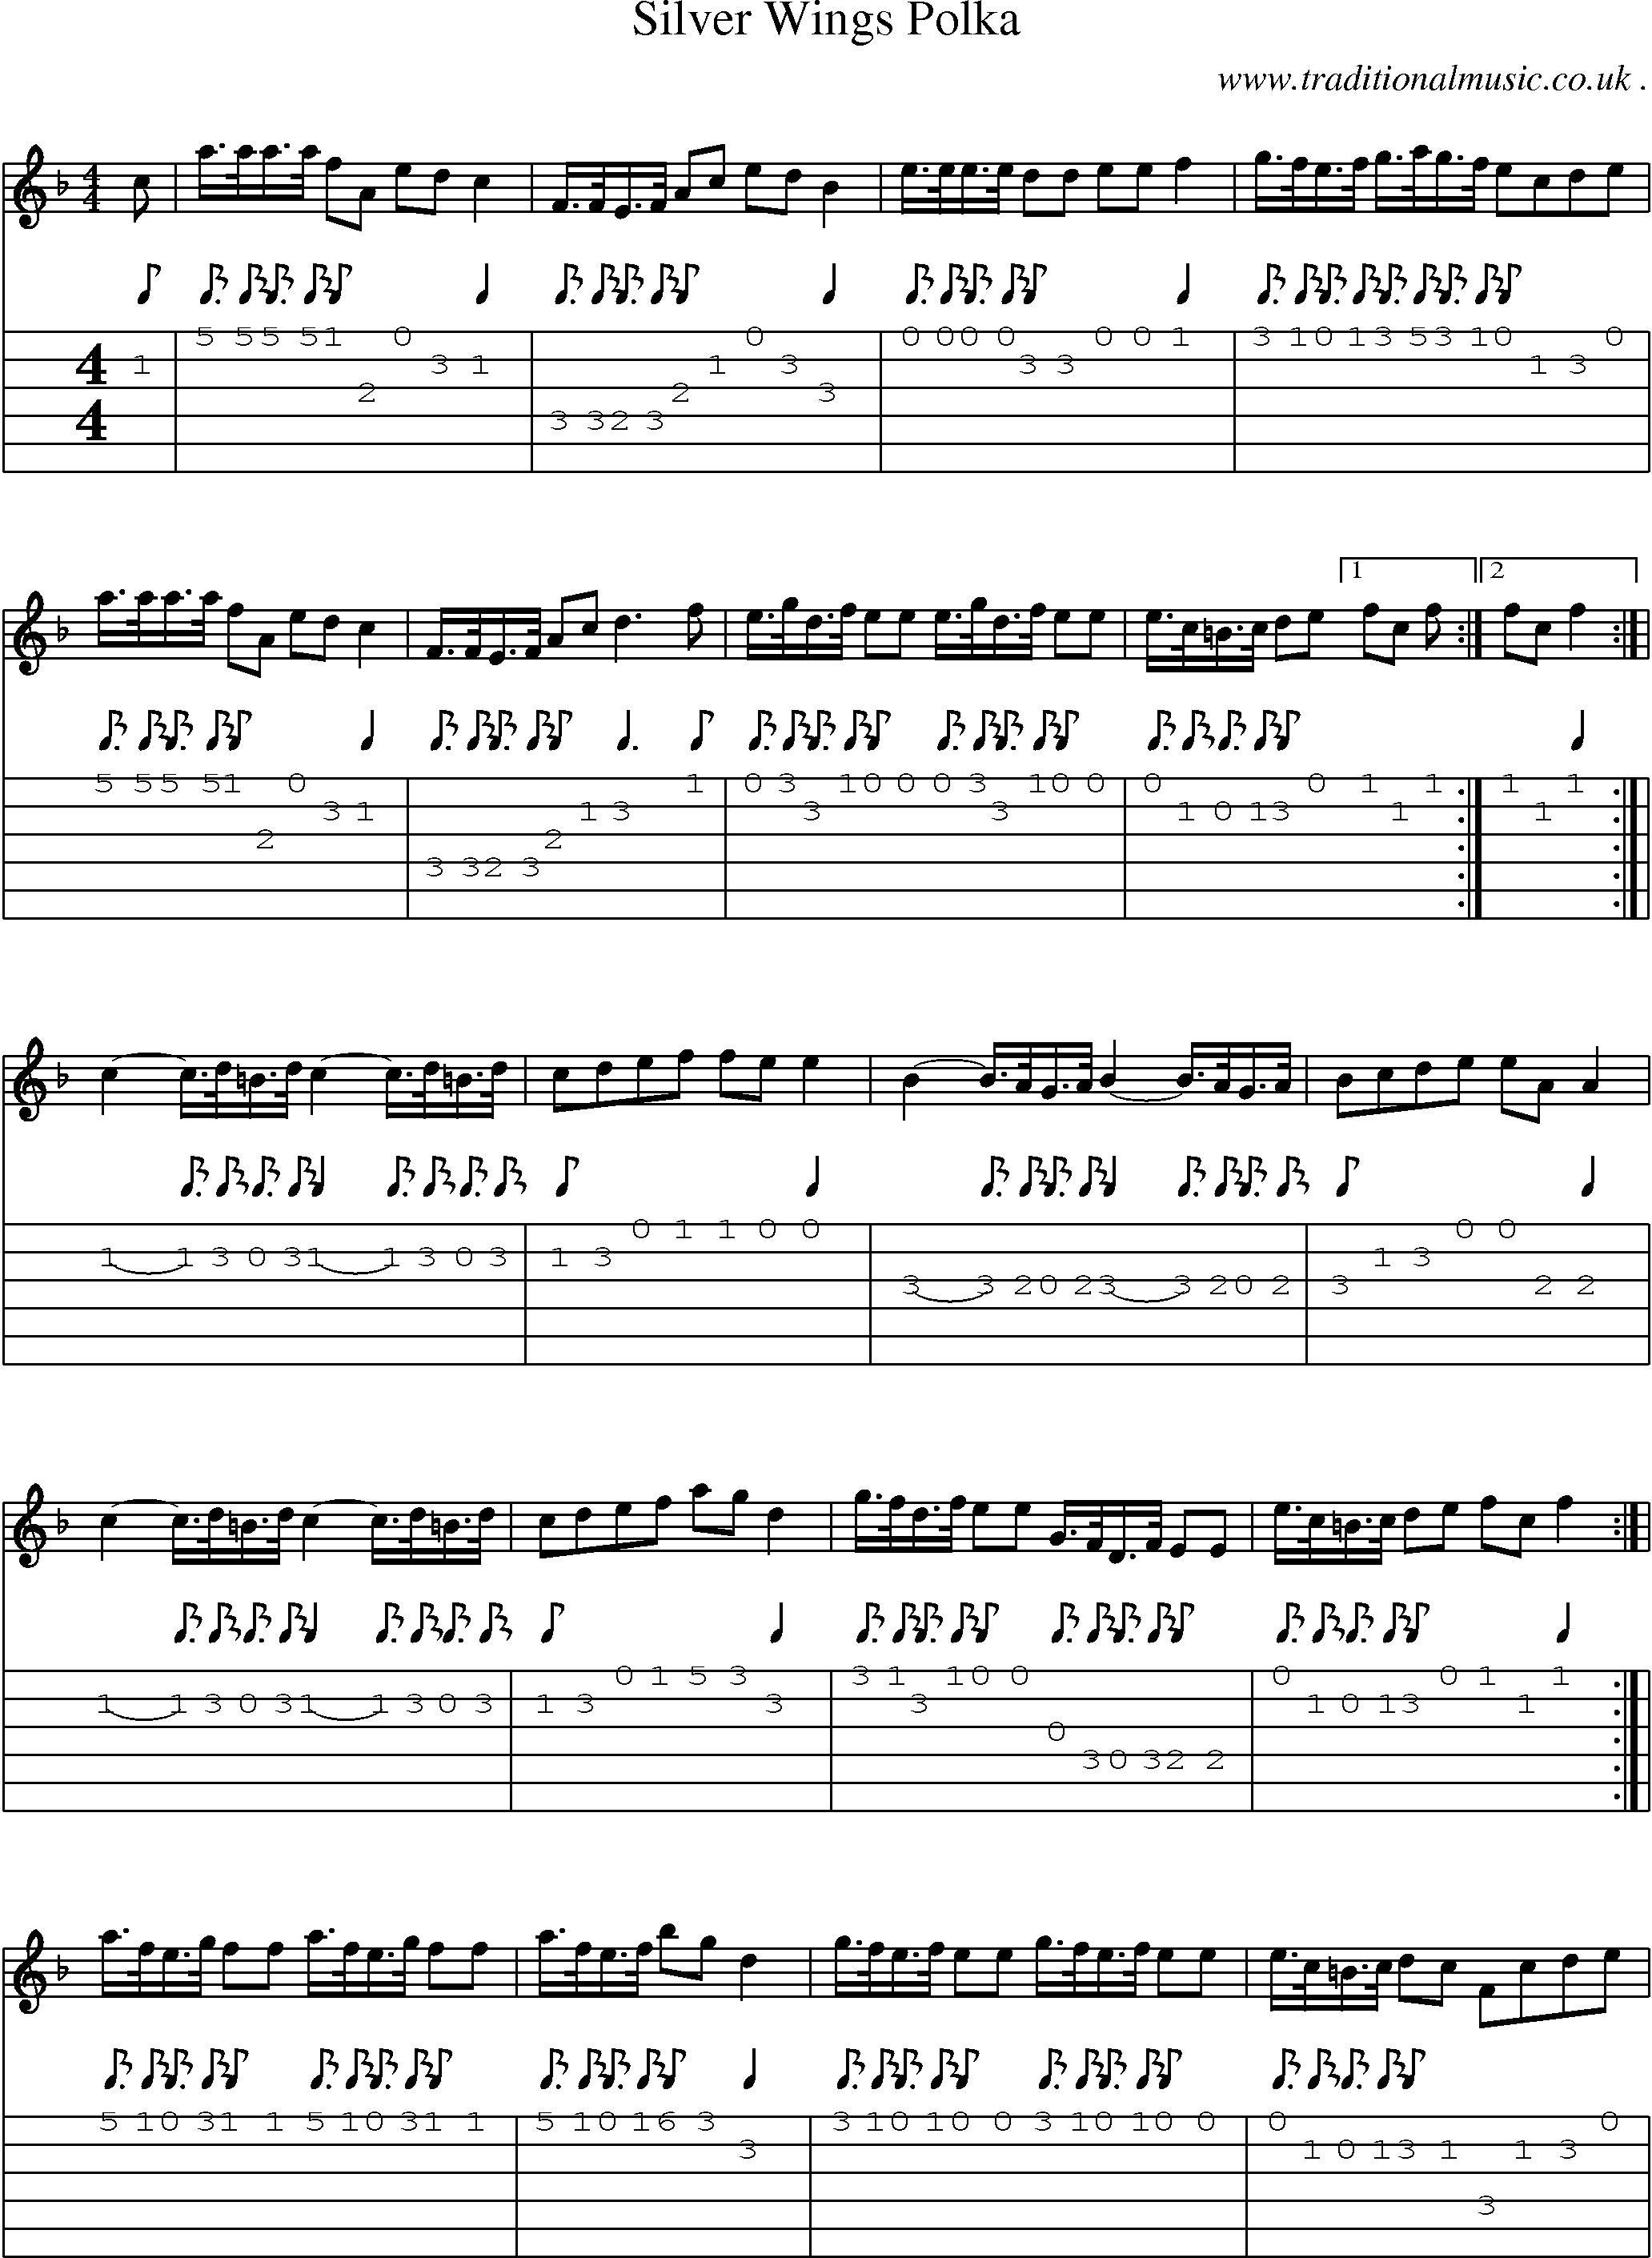 Sheet-Music and Guitar Tabs for Silver Wings Polka